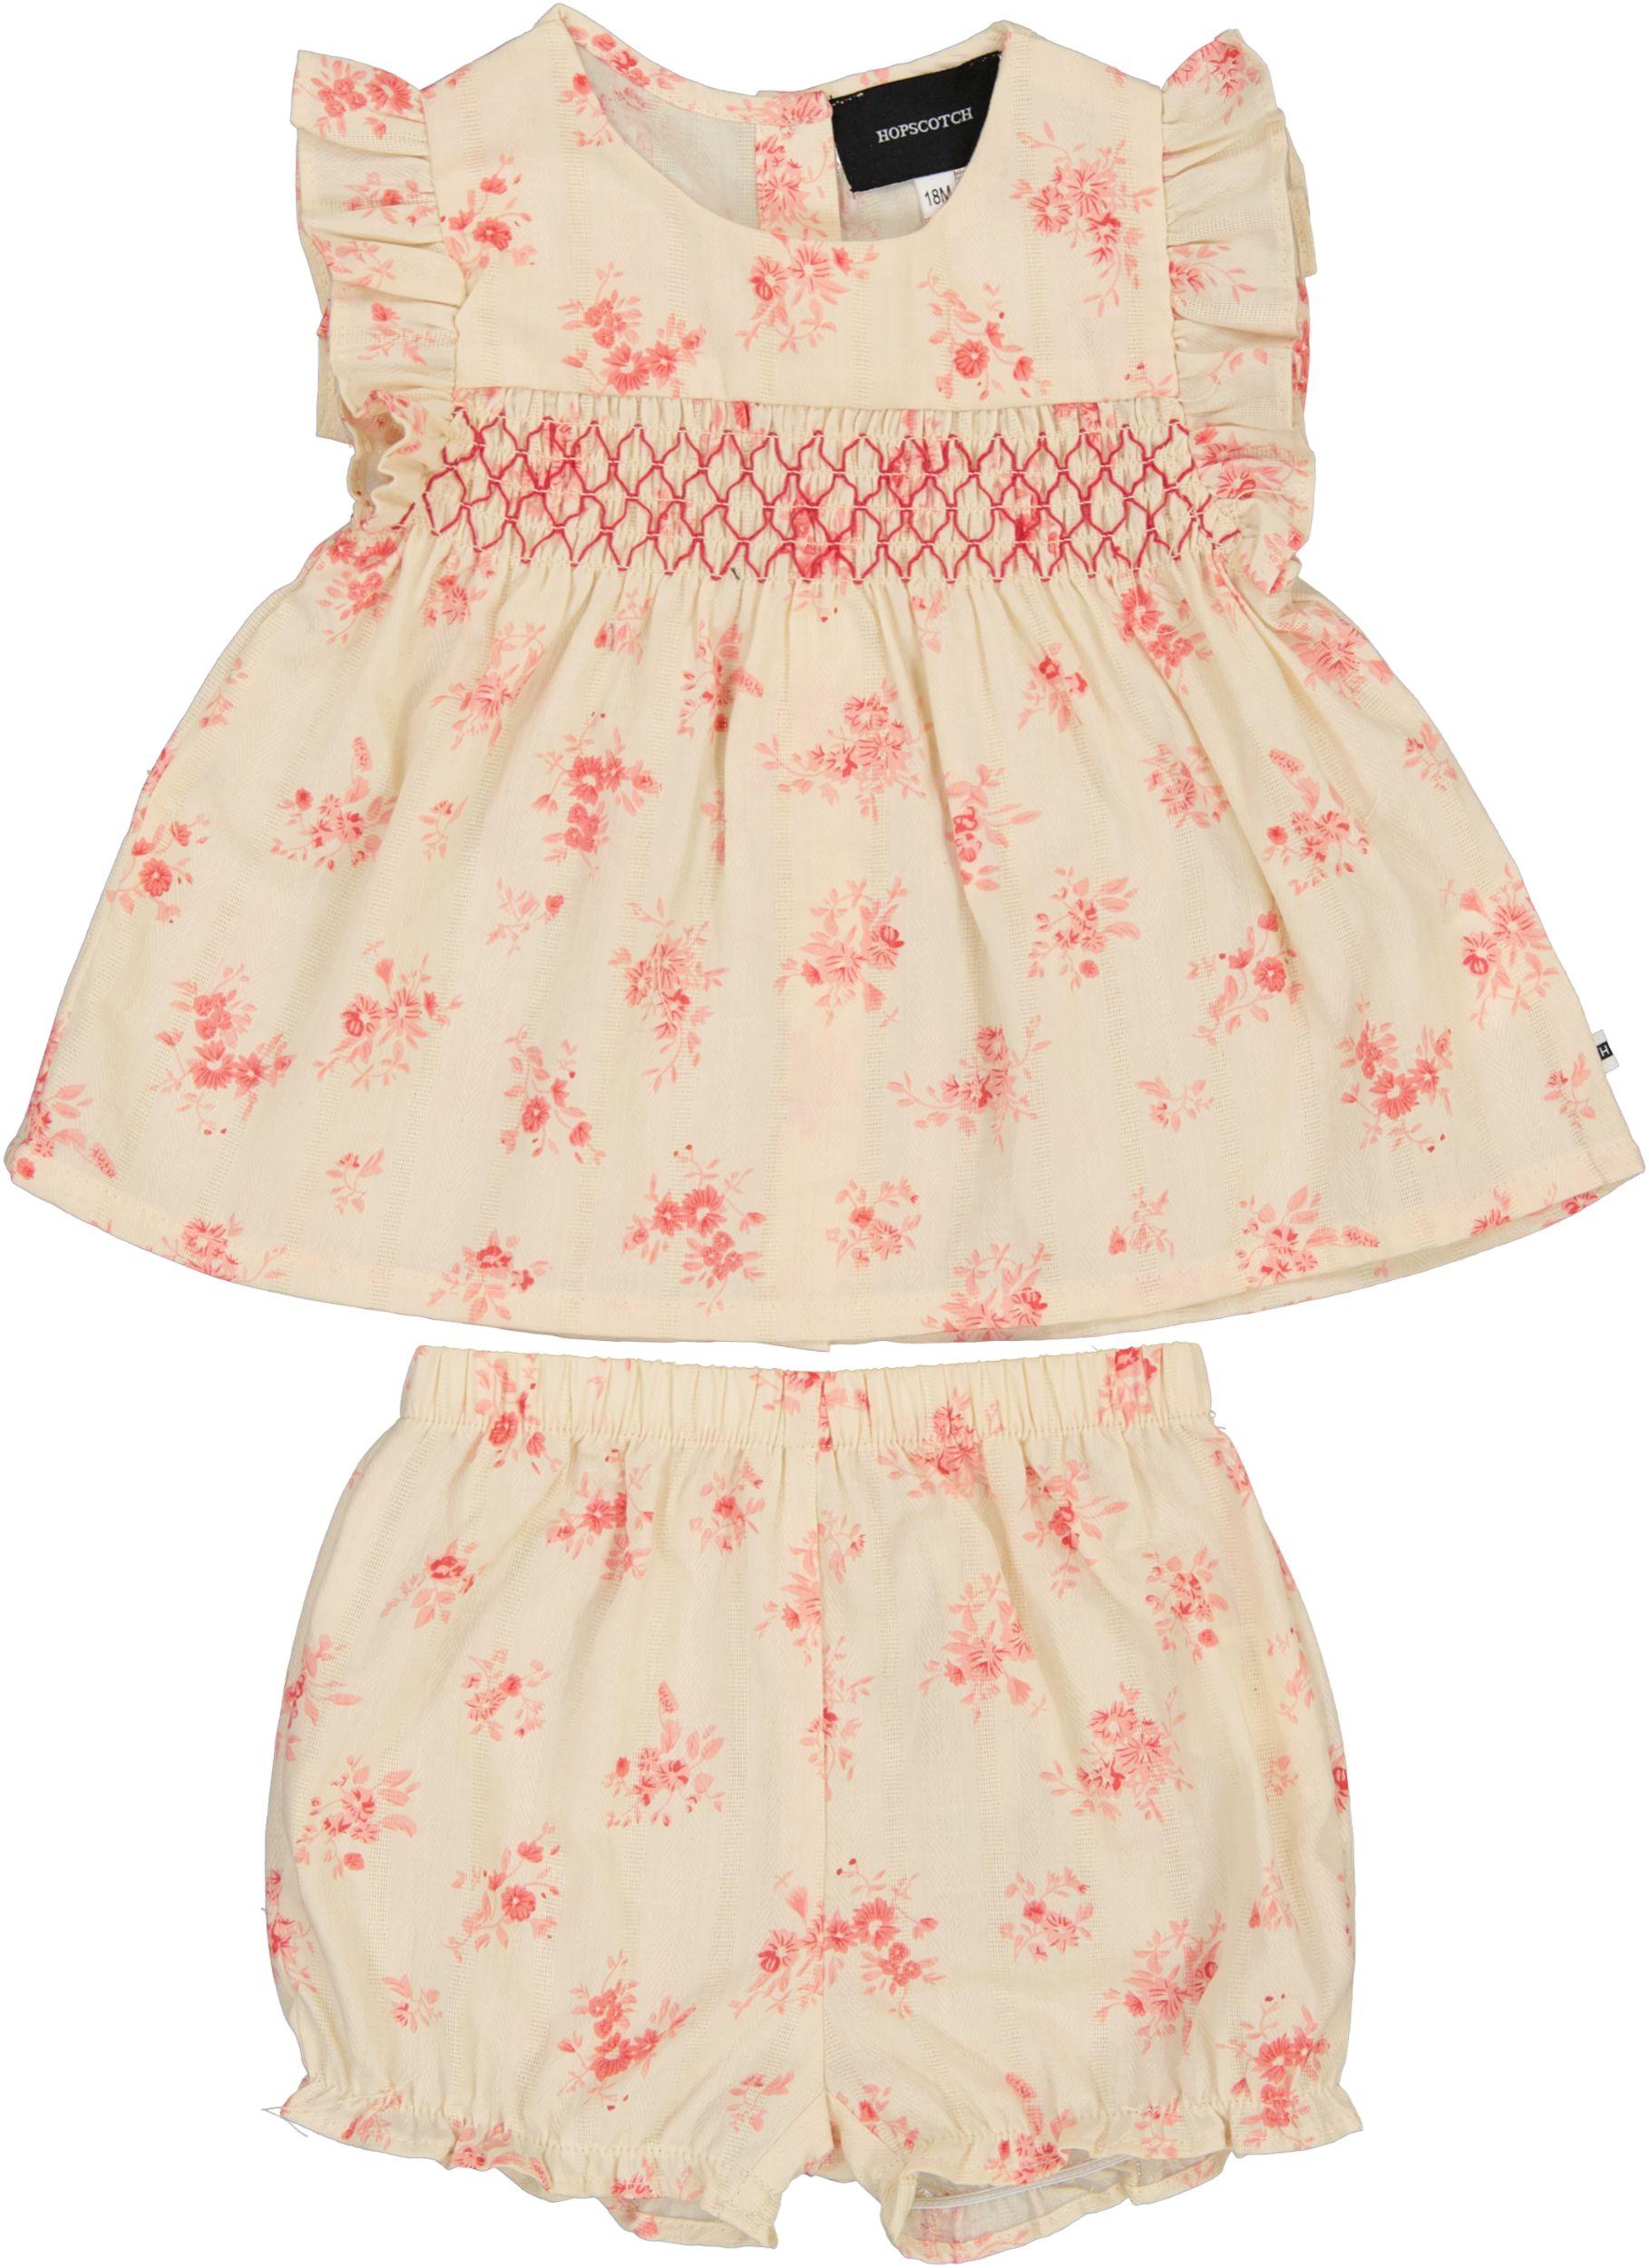 Girls Clothing | Kids Party wear dress From Hopscotch | Freeup